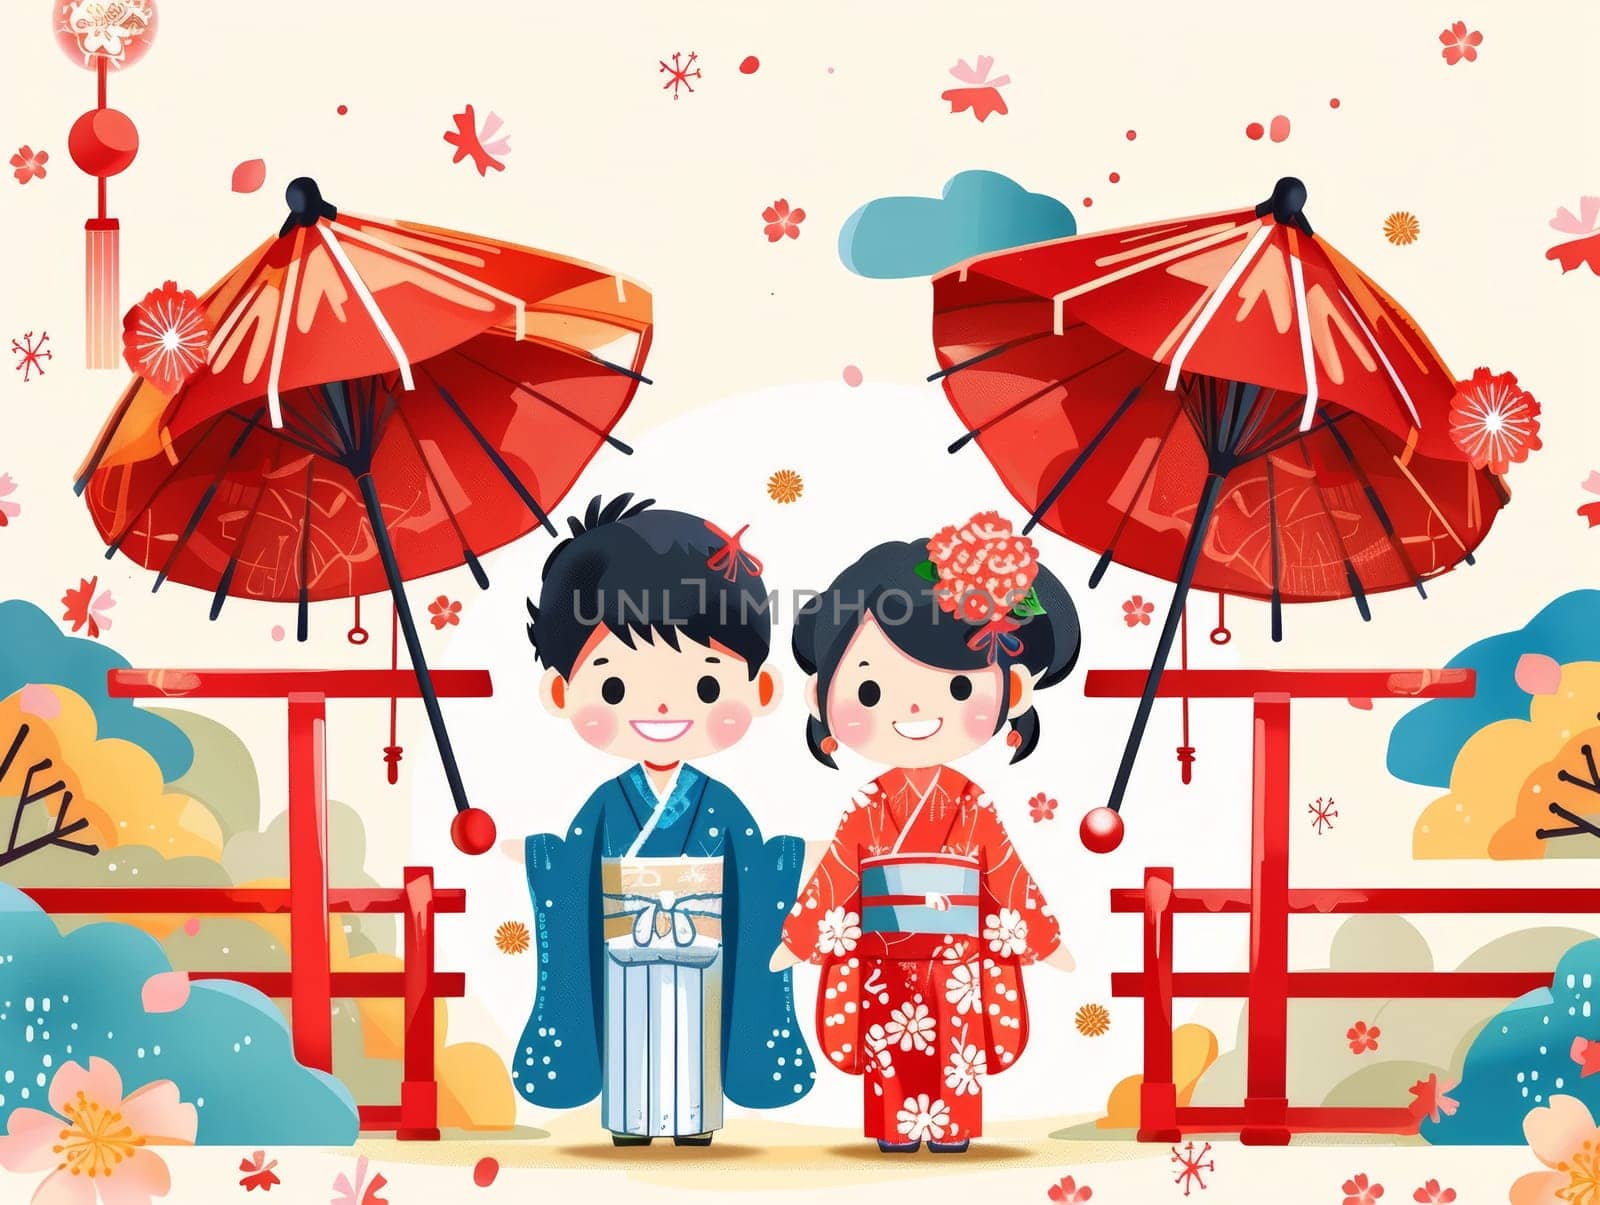 Two cheerful young people in traditional Japanese attire stand under colorful ceremonial umbrellas, surrounded by vibrant flowers and Torii gates in a lively cultural scene. by sfinks